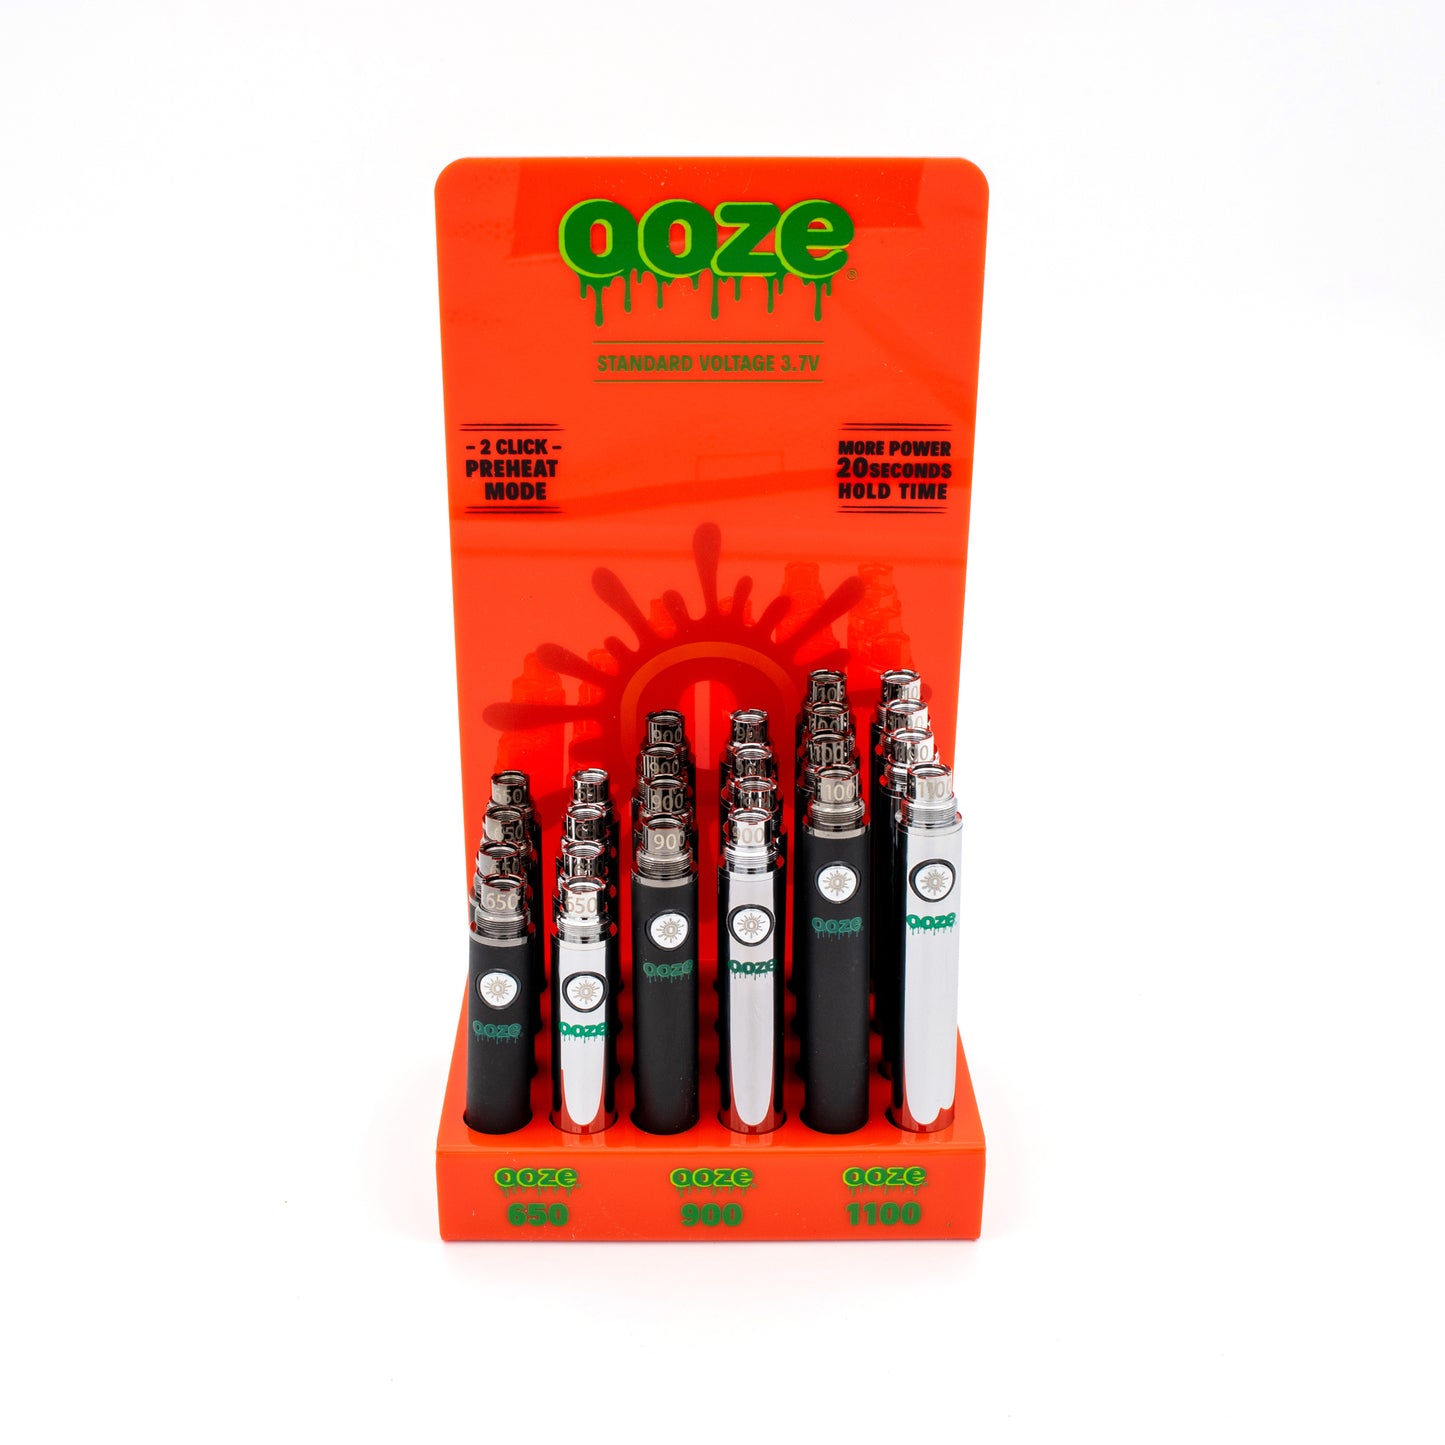 Ooze 510T Vape Battery Display 24ct Choose from Twist or Non-Twist